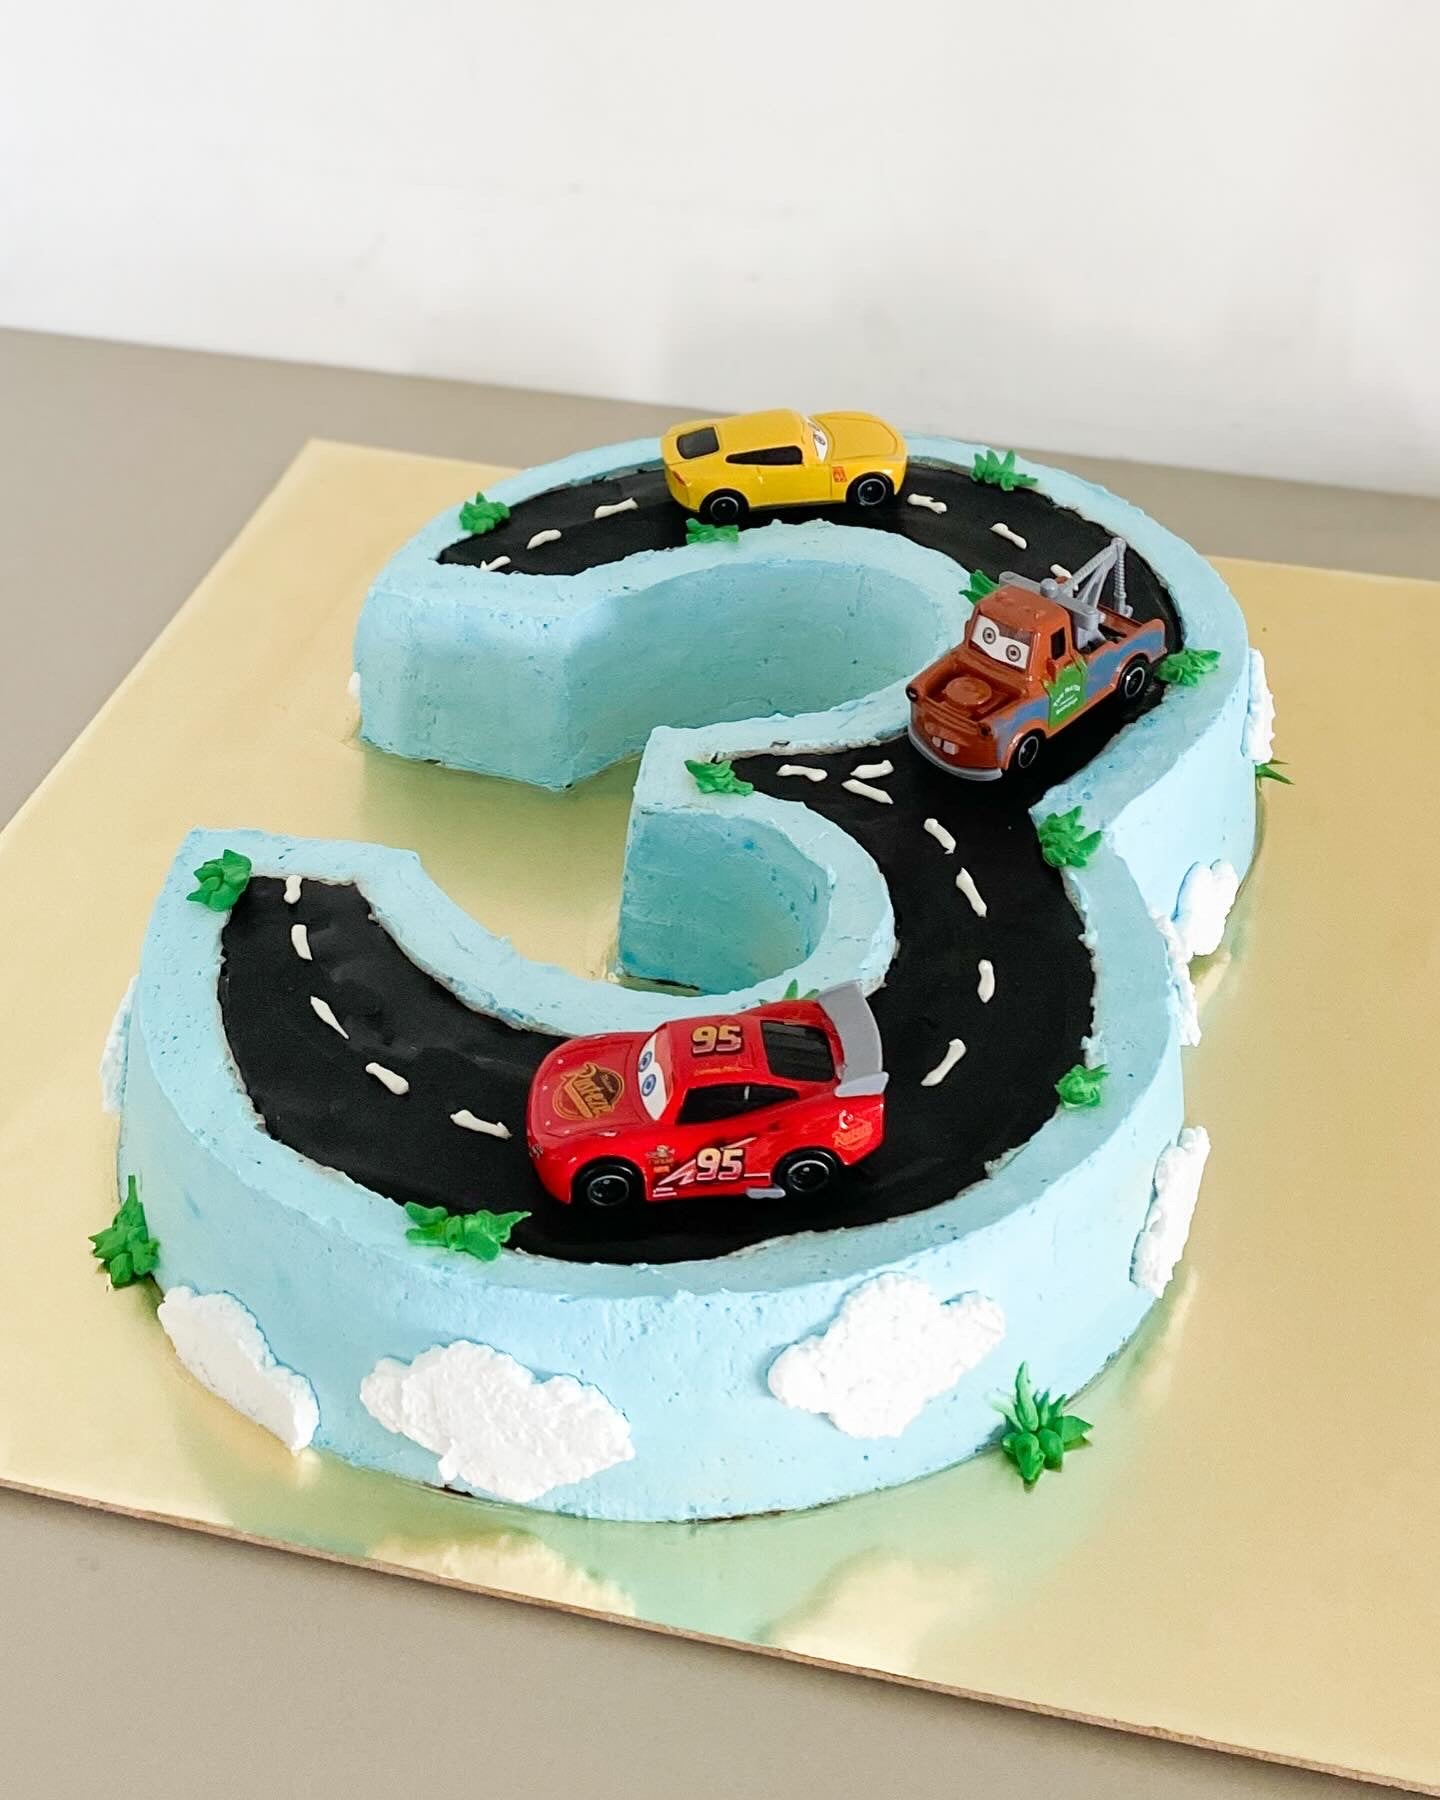 Sivasurya Car Cake | Cake World - Delicious Cakes for Every Occasion.